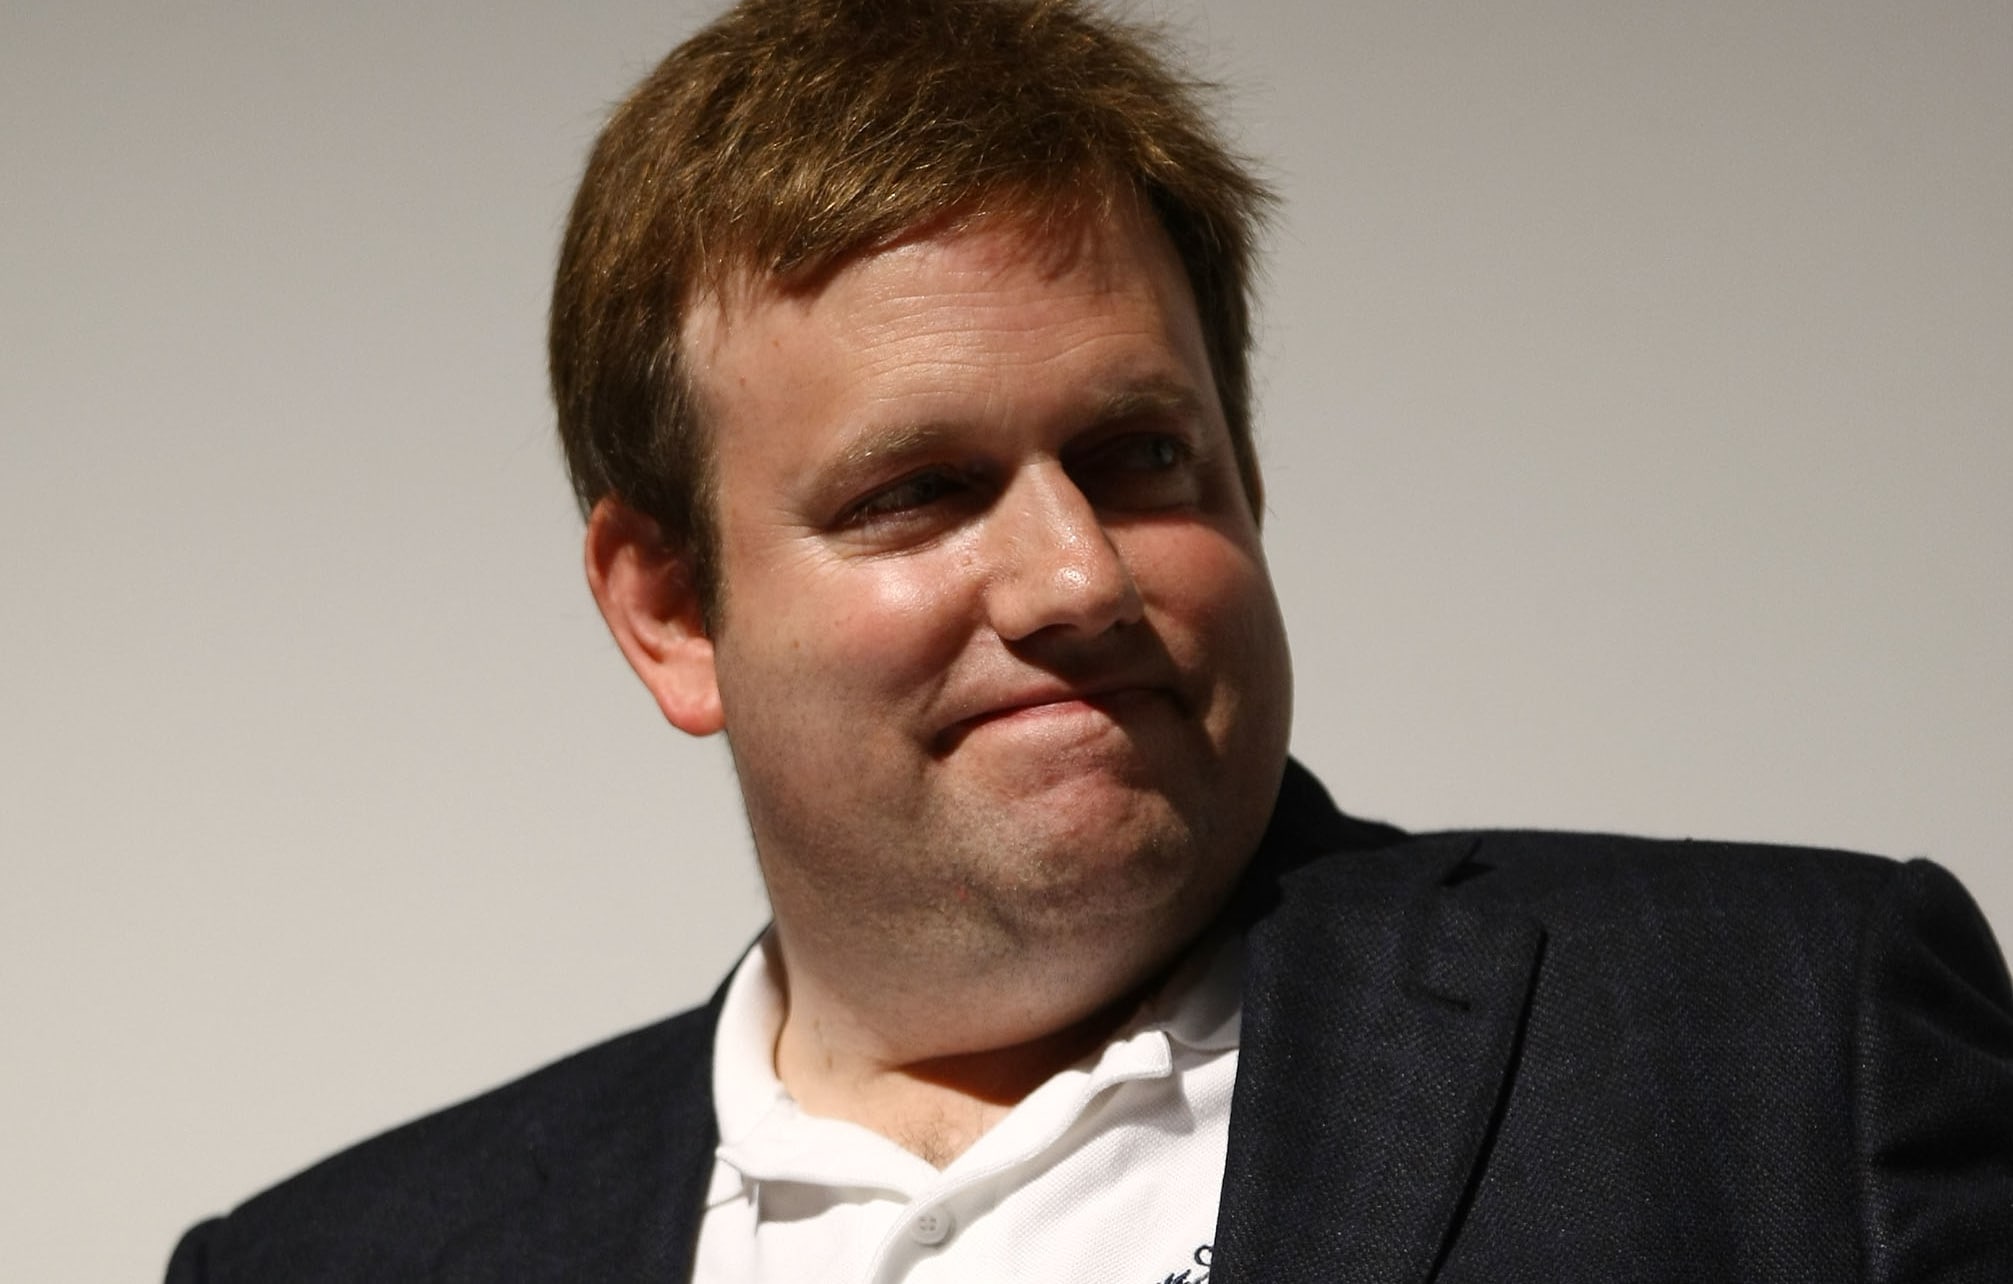 NEW YORK - MAY 01: Political consultant Frank Luntz attends the premiere and panel discussion of "Poliwood" during the 2009 Tribeca Film Festival at BMCC Tribeca Performing Arts Center on May 1, 2009 in New York City.